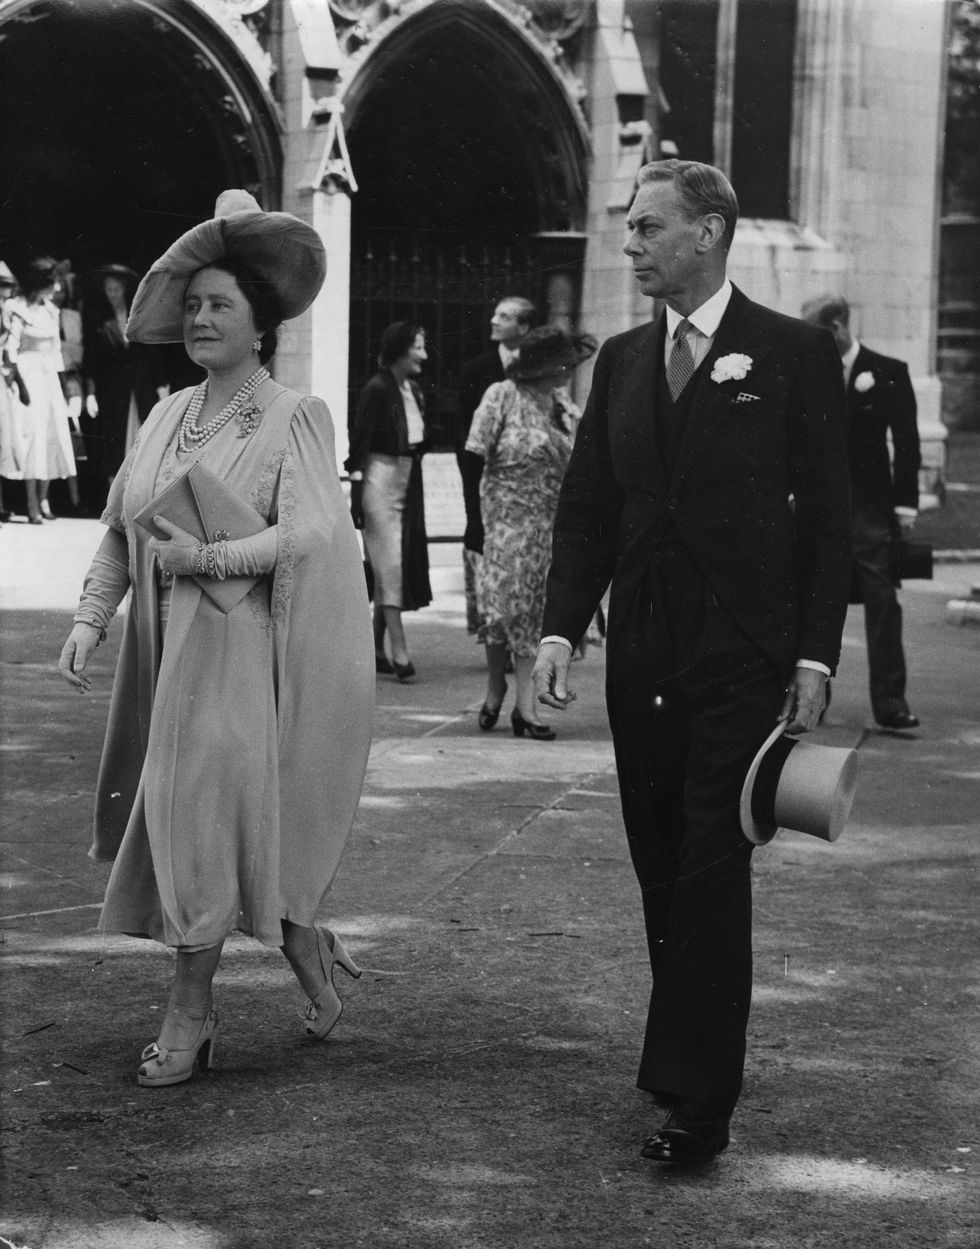 1950  king george vi of great britain 1895   1952 and queen elizabeth 1900   2002 at a wedding  photo by central pressgetty images